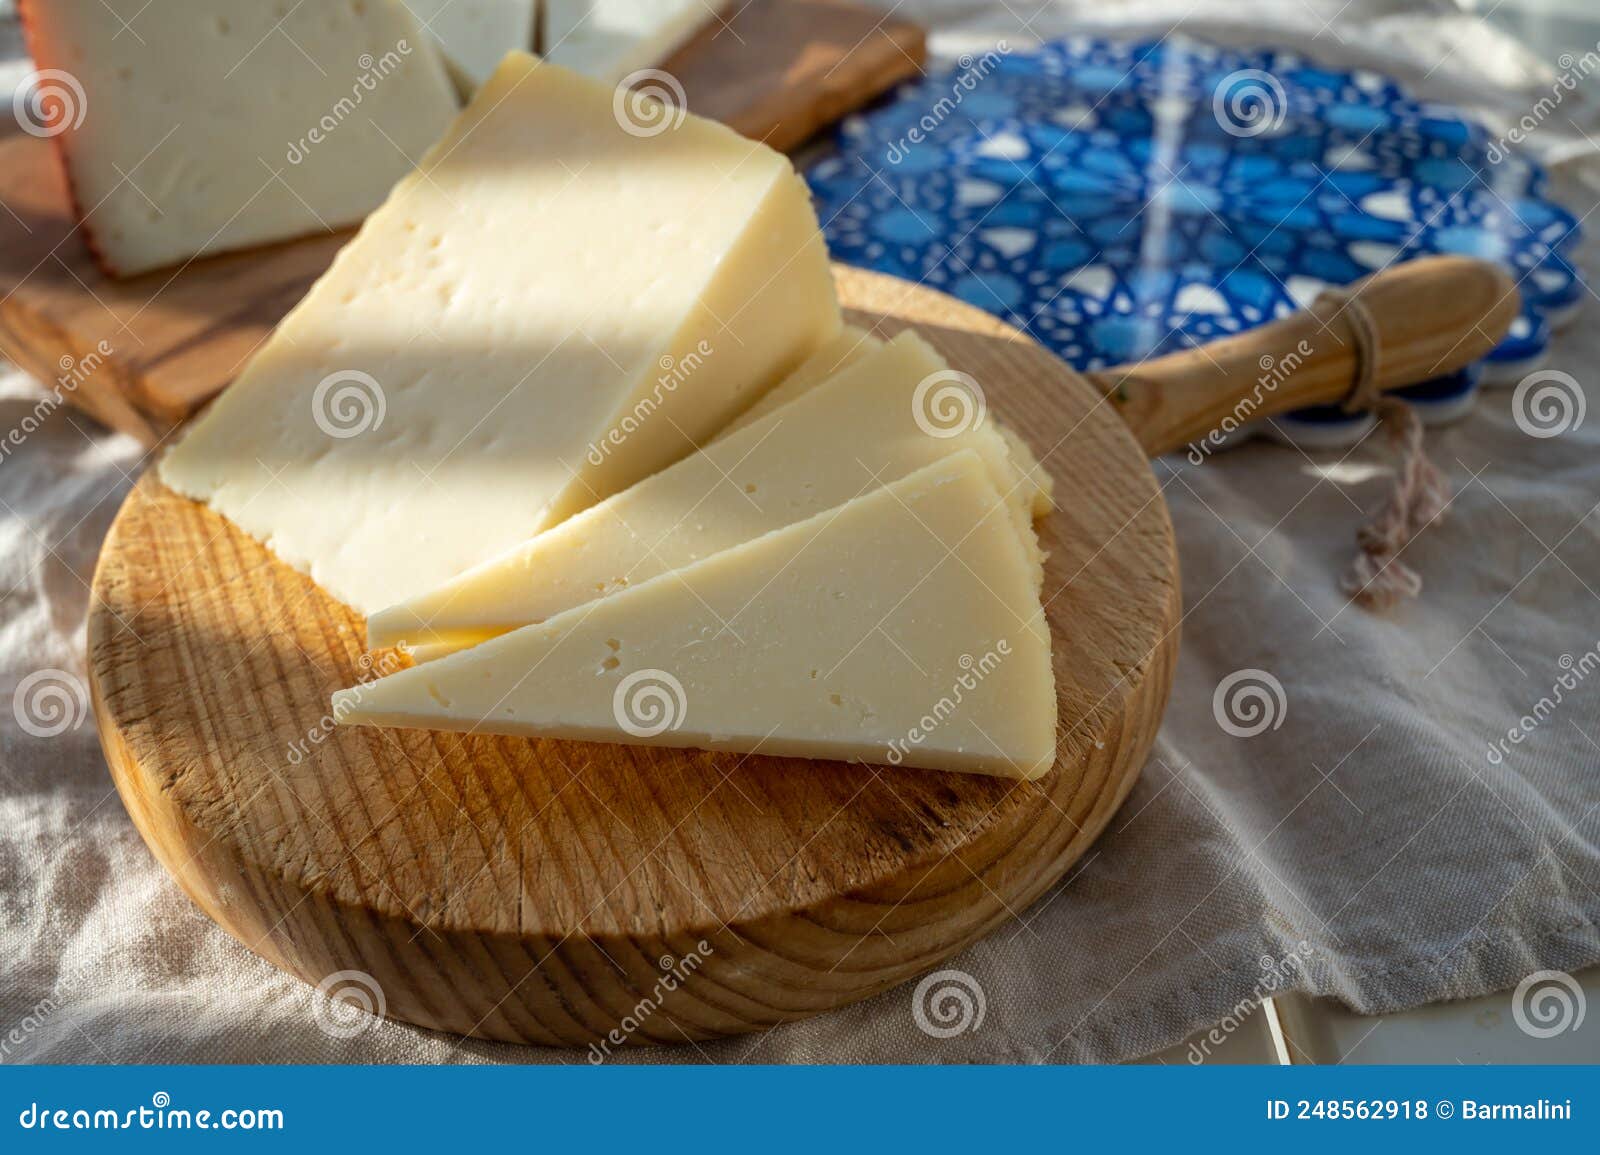 Spanish Hard Manchego Cow Sheep And Goat Cheese Served Outdoor In